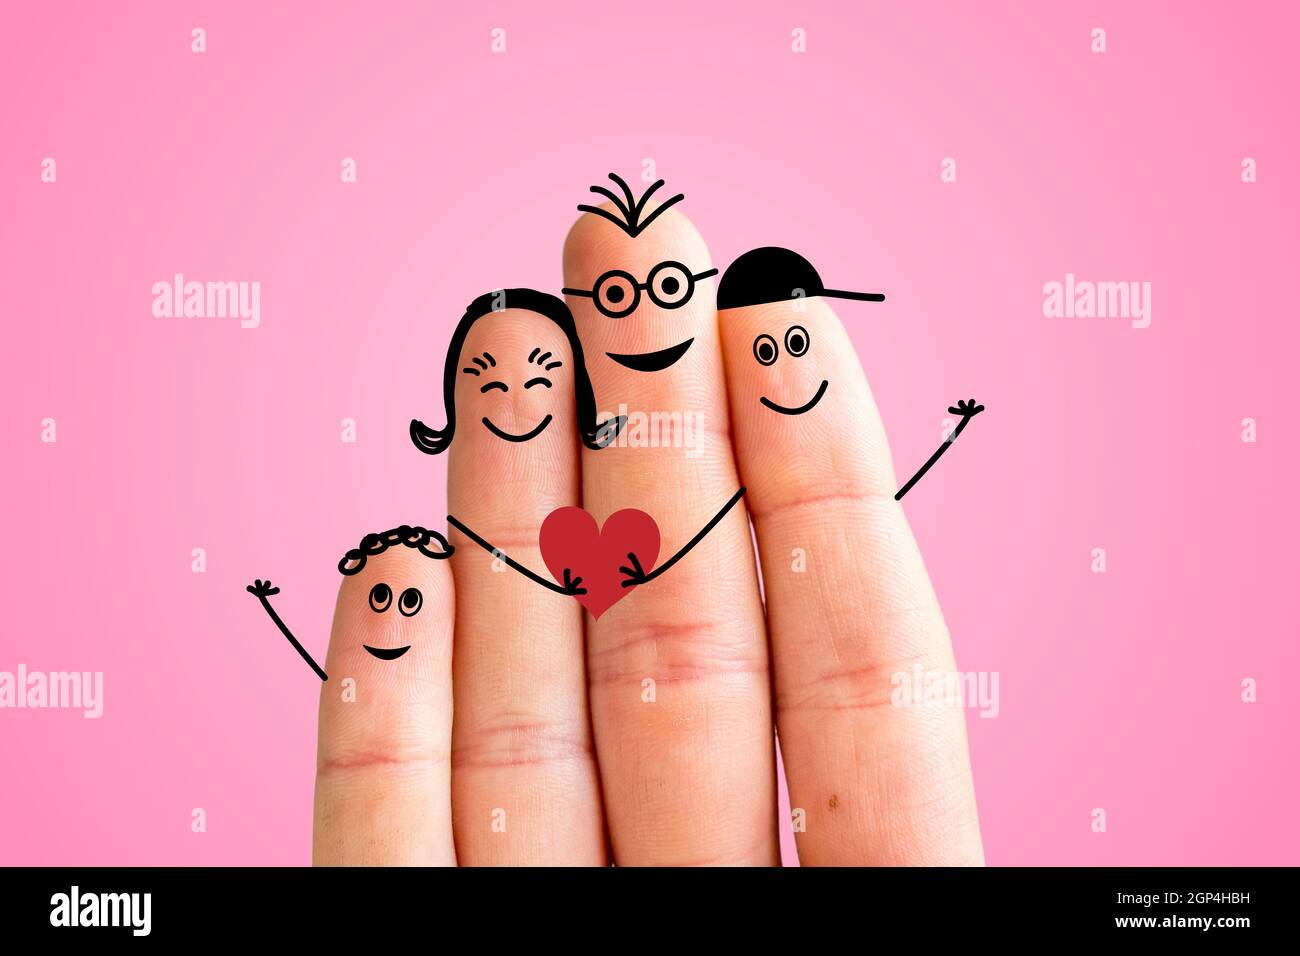 Painted fingers happy family concept, pink background Stock Photo